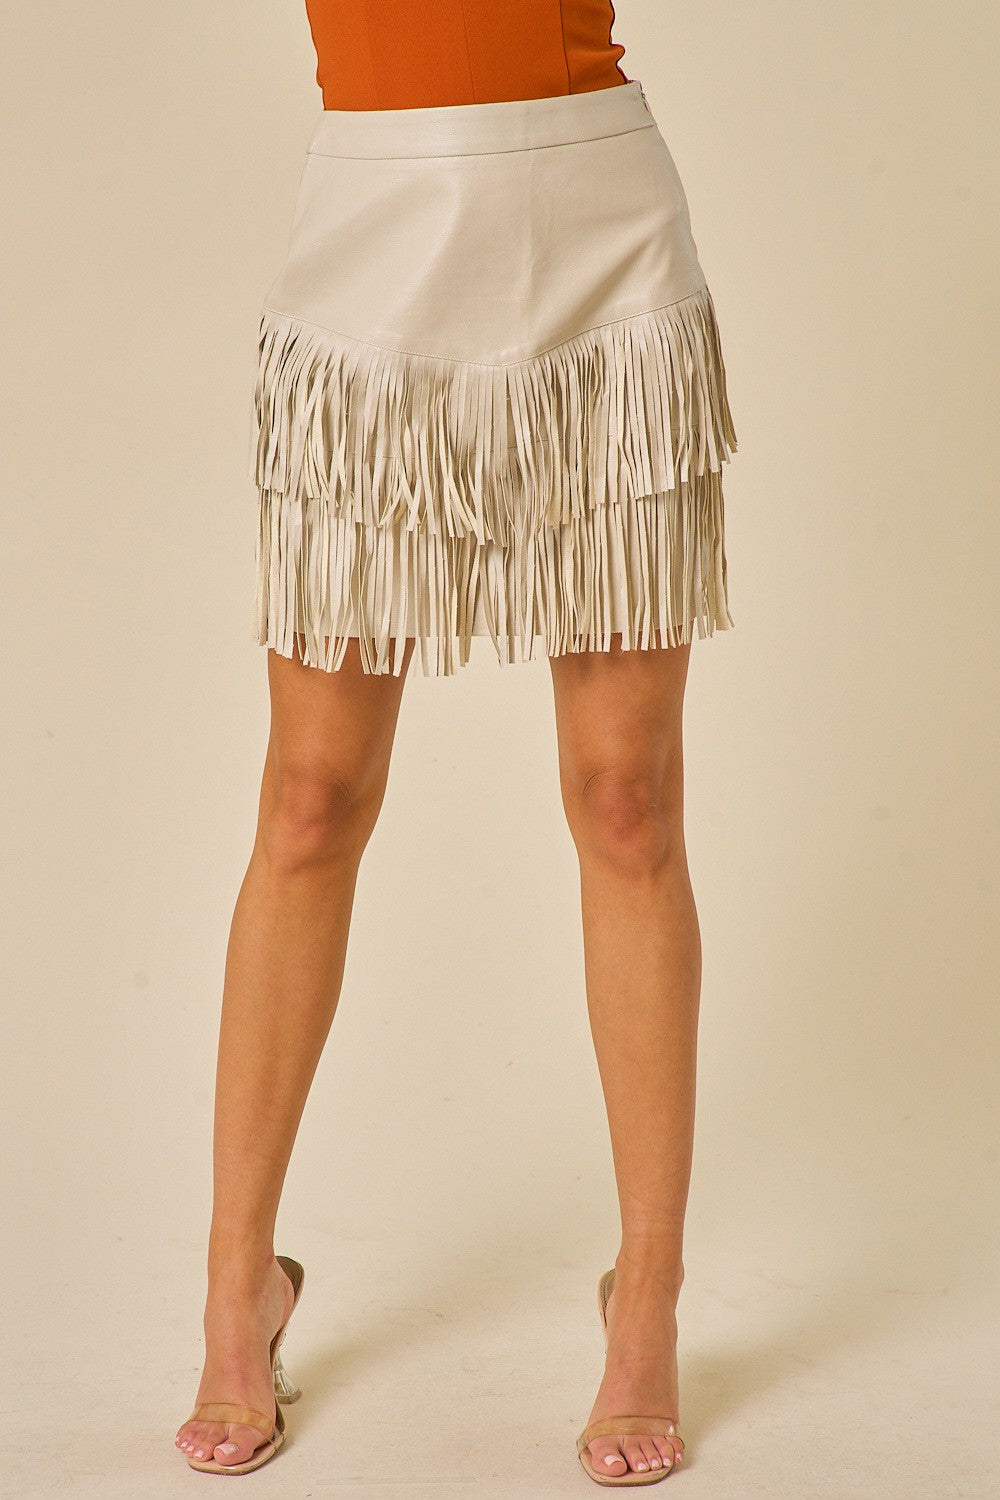 Clyde PU Leather Fringe Skirt